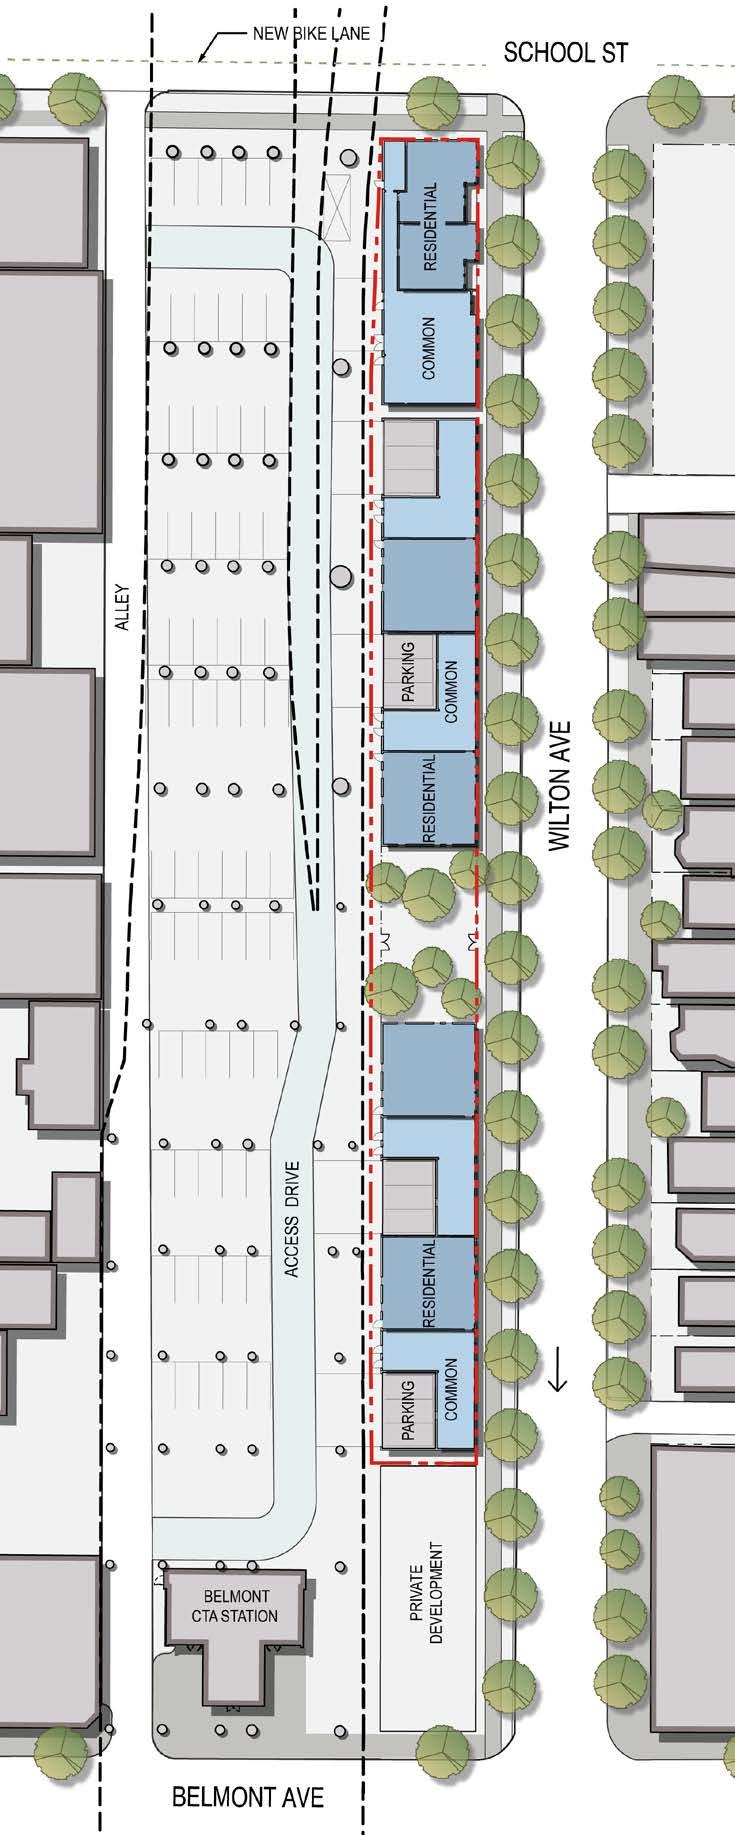 Wilton Site: 20,000 SF Restored parkway On-site parking: 3 spaces for each